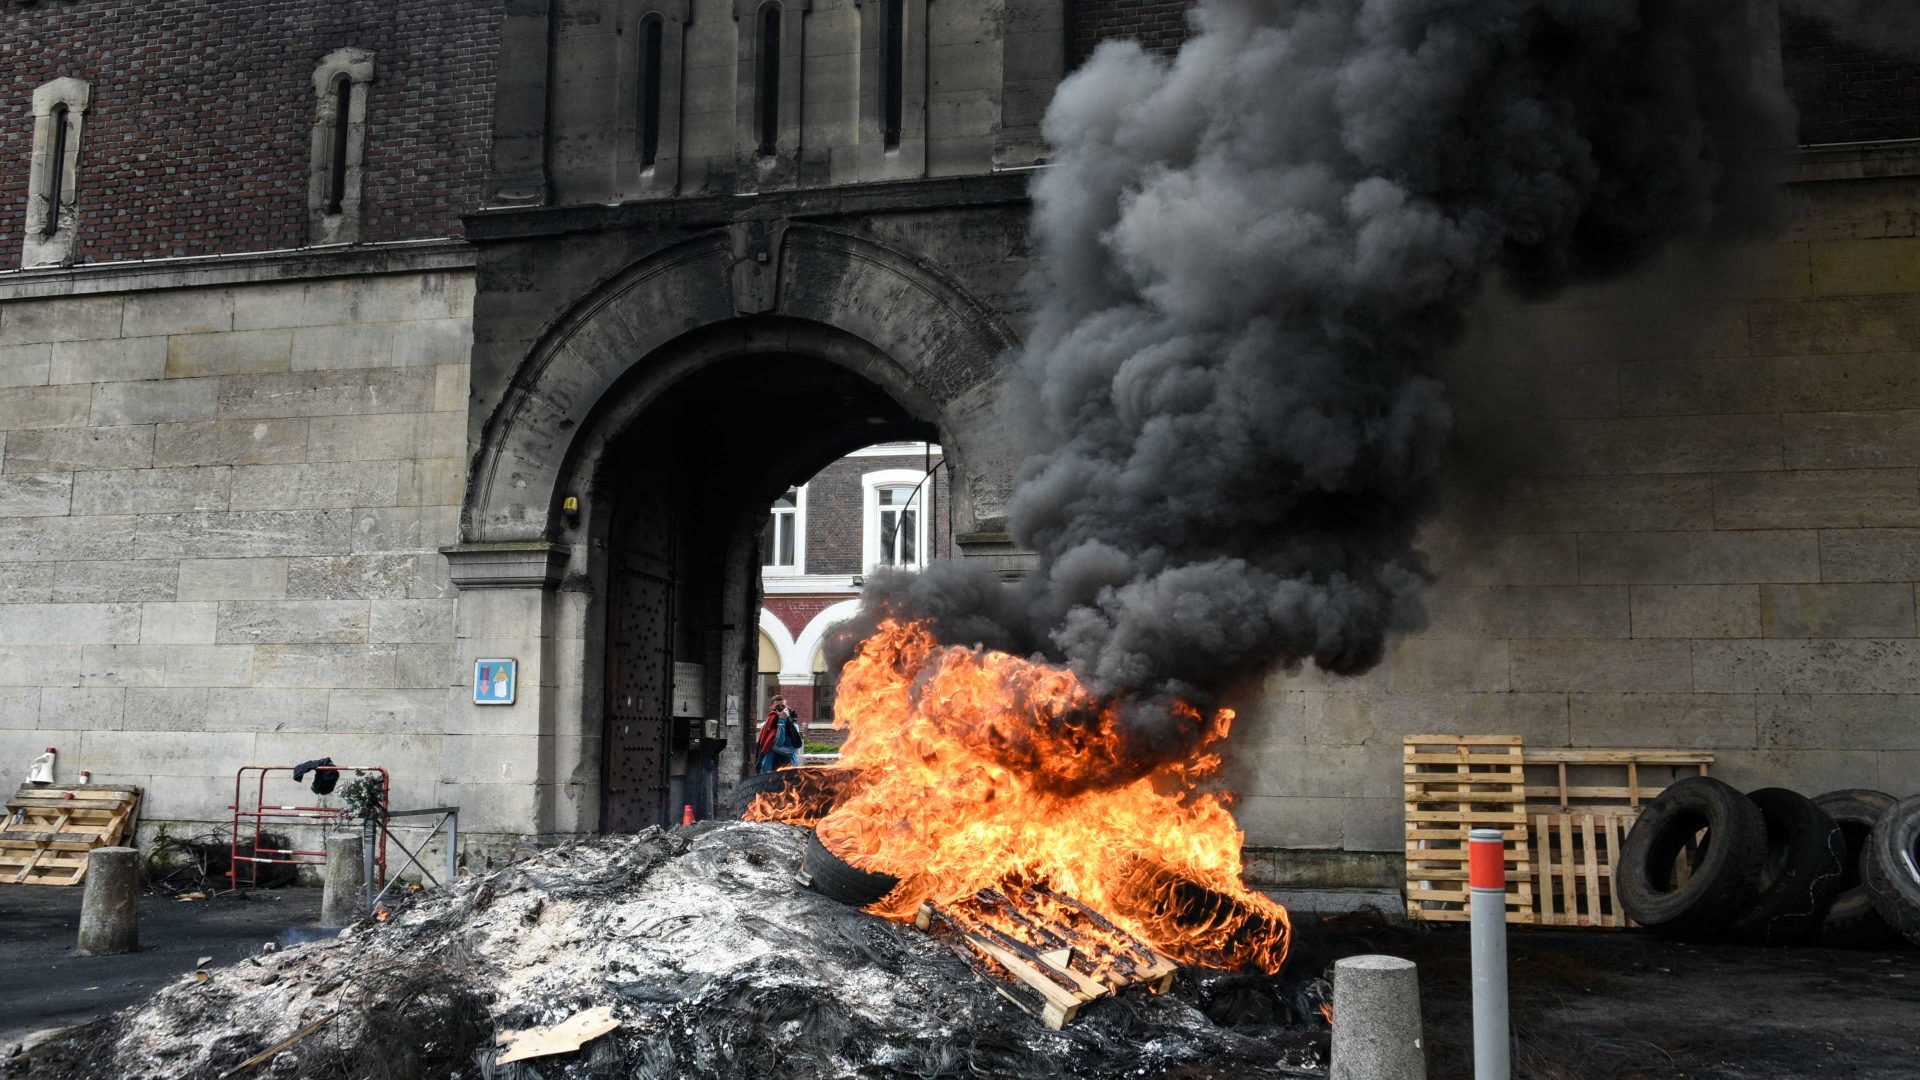 A fire at the entrance of Rouen prison. There are fears that drug war violence, most of which has been concentrated in Marseille, is now spreading to the rest of the country. Photo: Magali Cohen/Hans Lucas/AFP/Getty